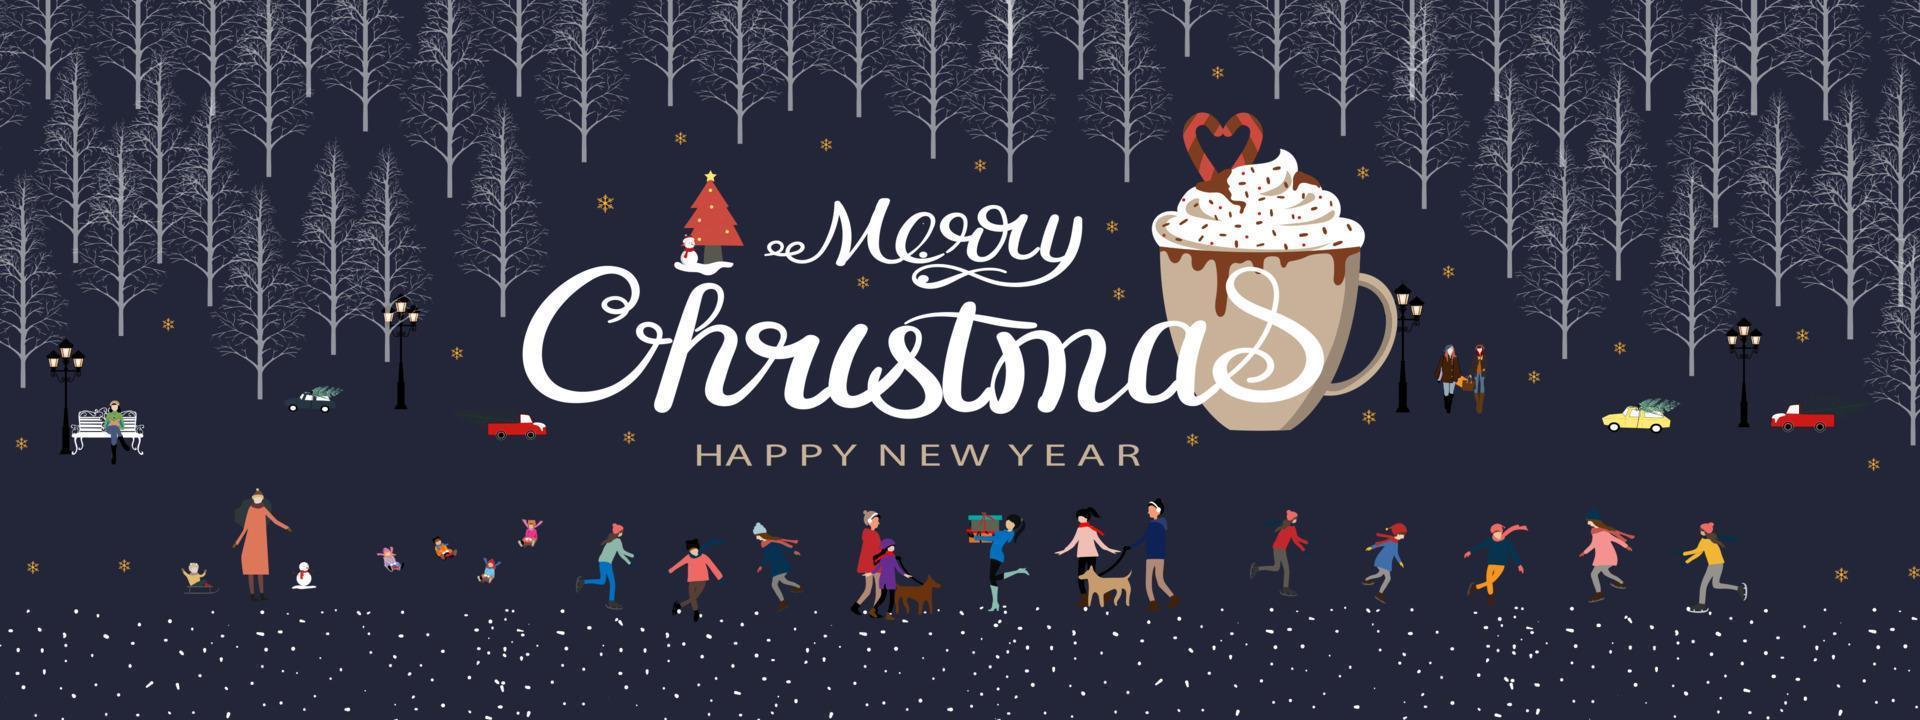 Christmas and Happy New Year 2023 banner with People celebrating in the park, Snowman,forest pine trees, Hot chocolate drink on night blue sky background. Vector illustration panorama backdrop